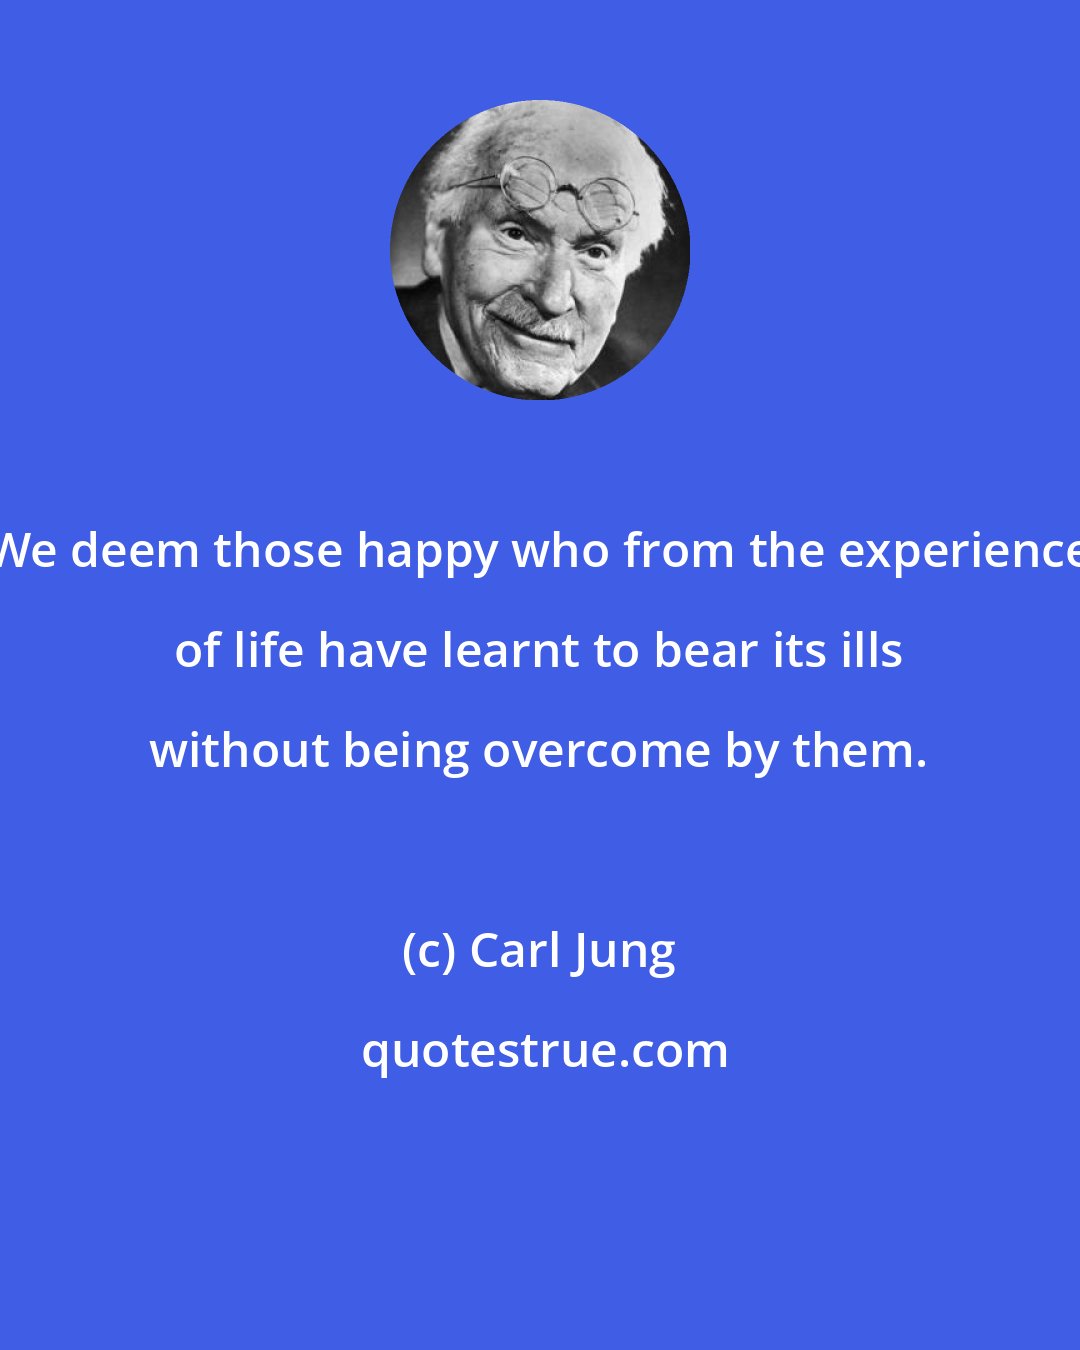 Carl Jung: We deem those happy who from the experience of life have learnt to bear its ills without being overcome by them.